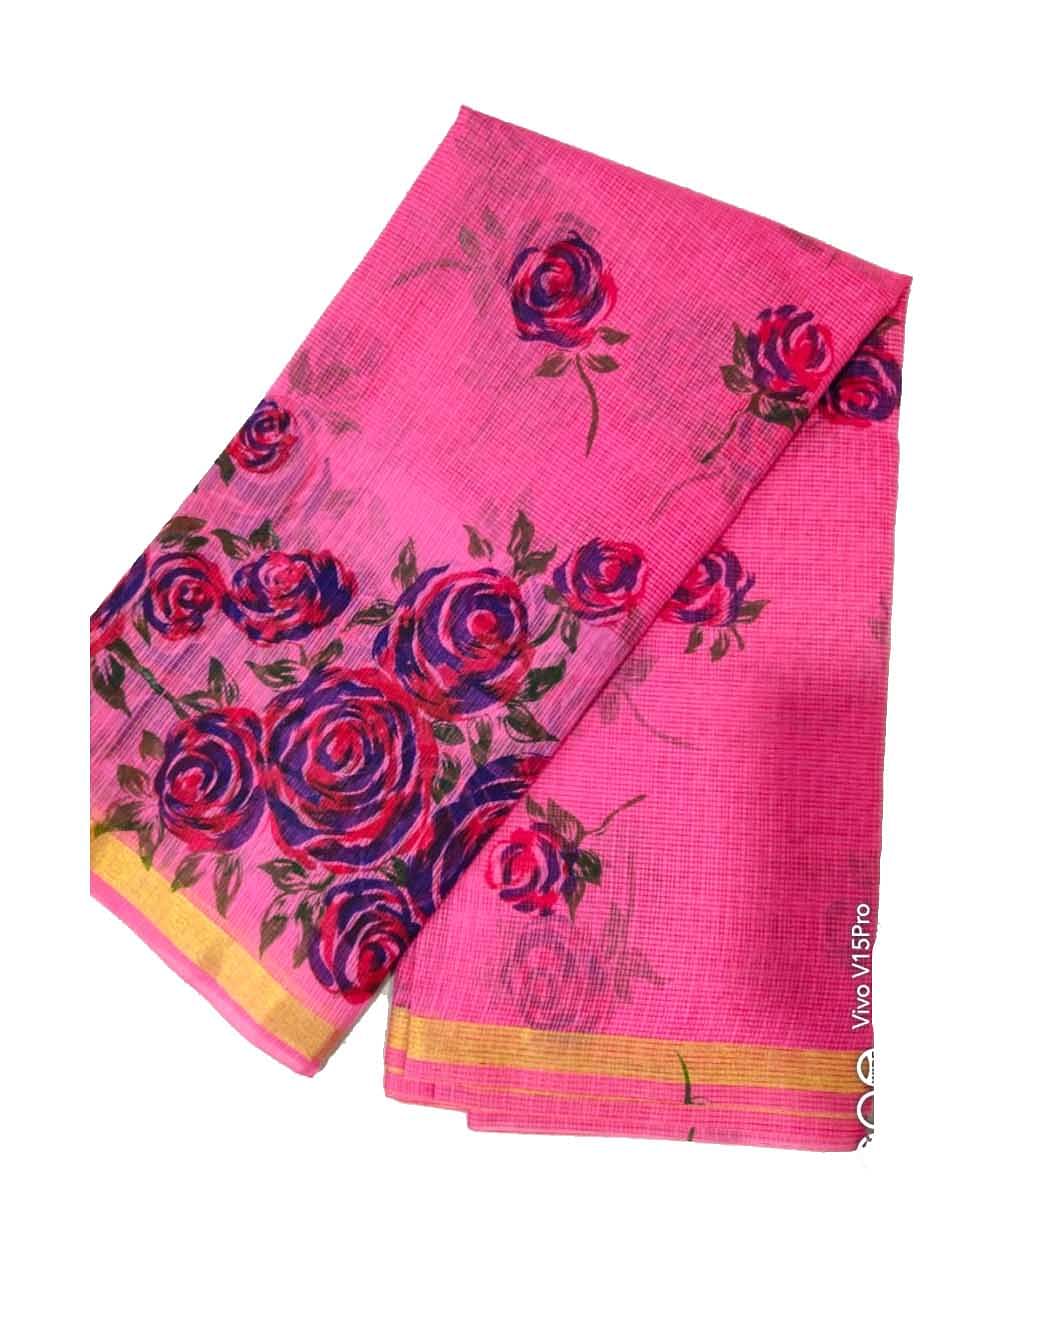 WOMEN SYNTHETIC DORIYA SAREE WITH BLOUSE-PINK-DF JULY SUMMER COOL 04